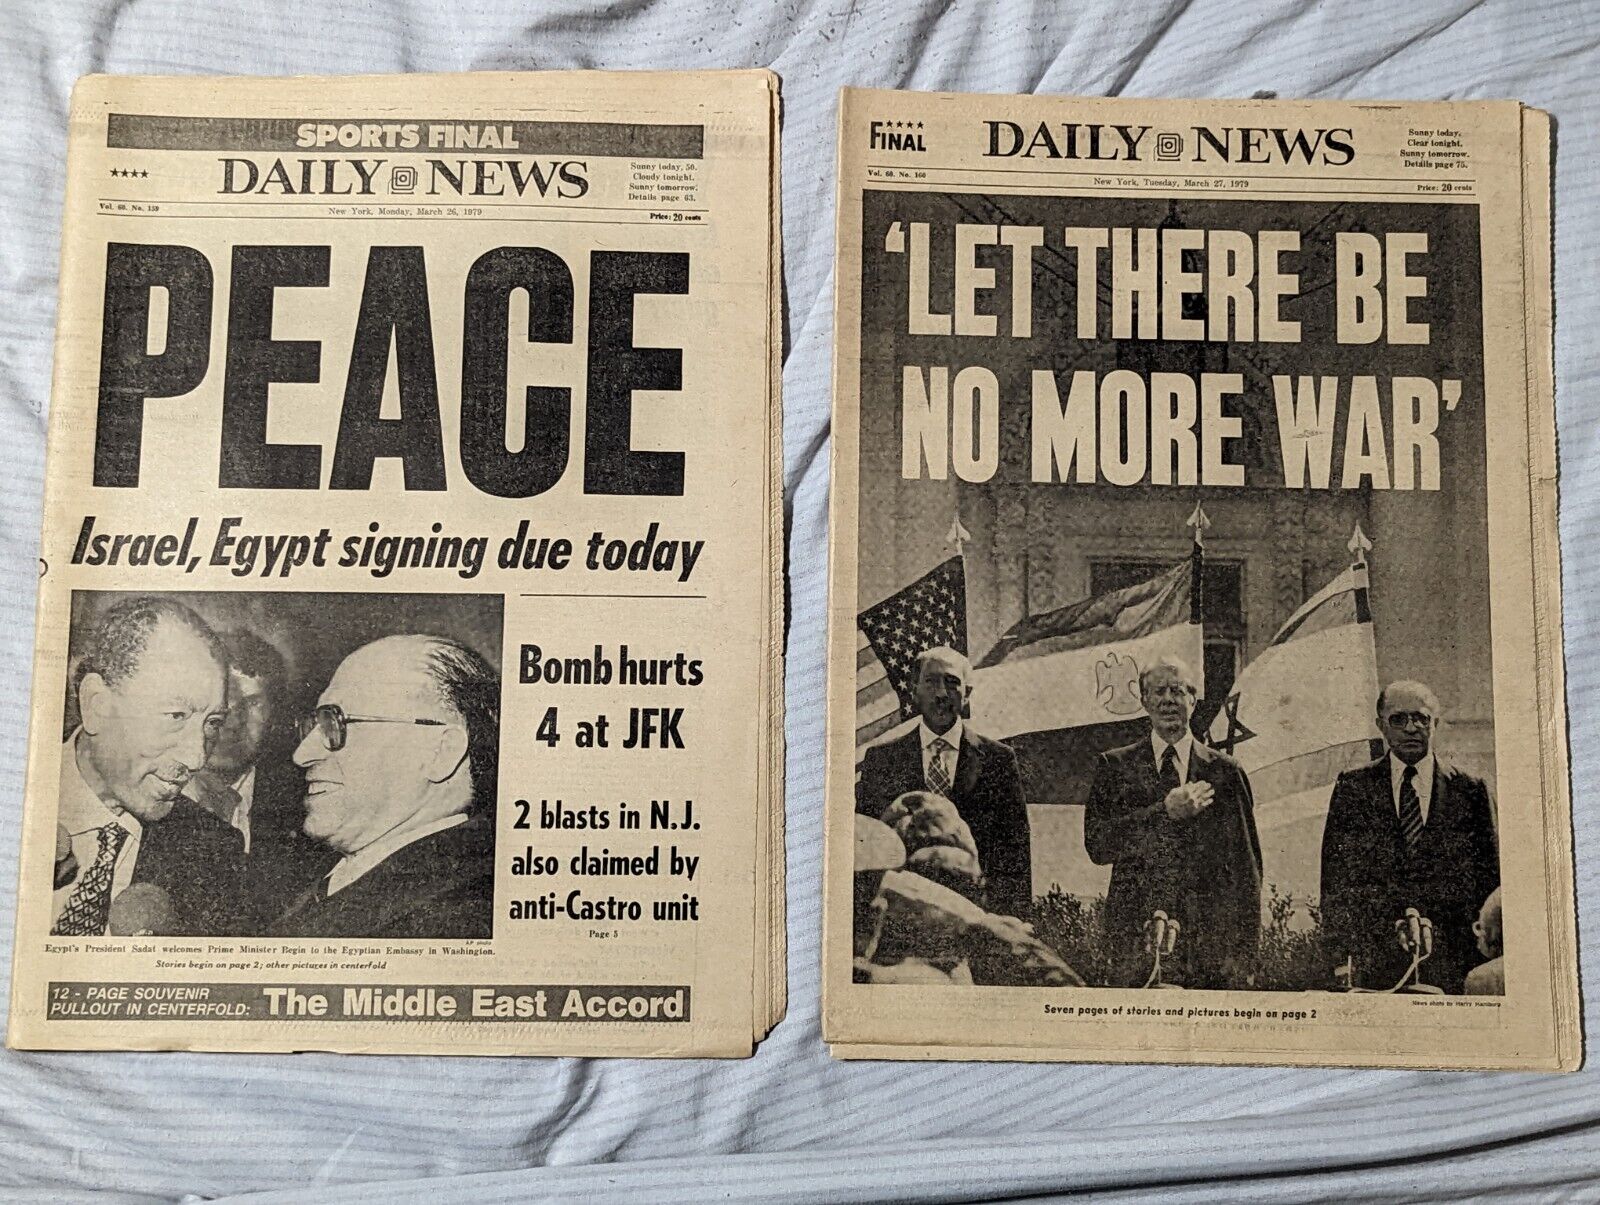 LOT OF 2 Daily News March 26 1979 Peace Israel Egypt Middle East Accord Sadat